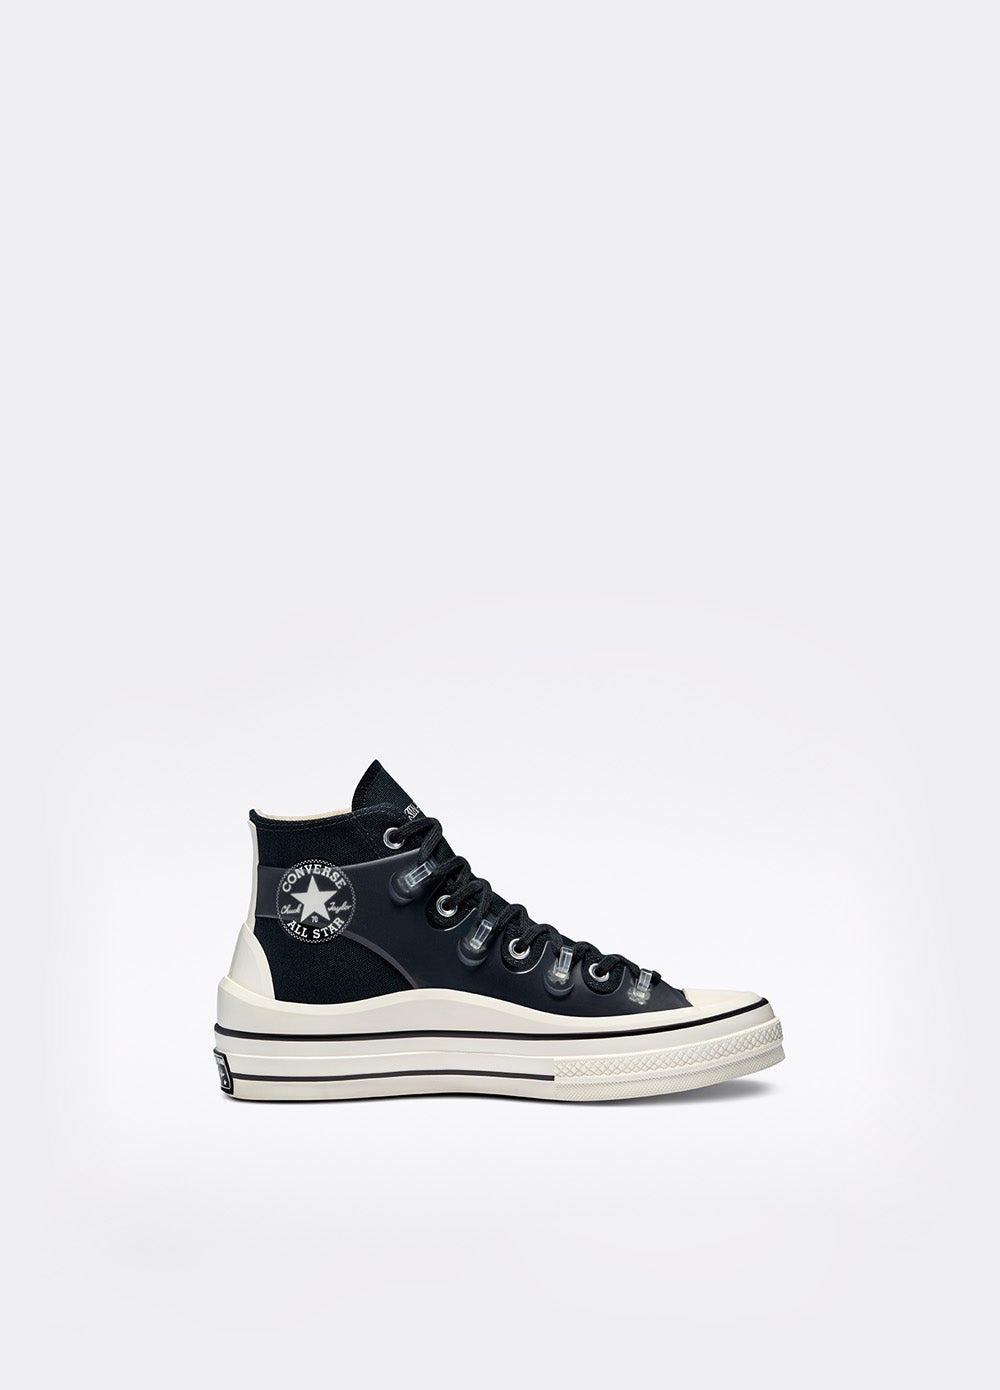 LOOK: Converse x Kim Jones full collection with prices